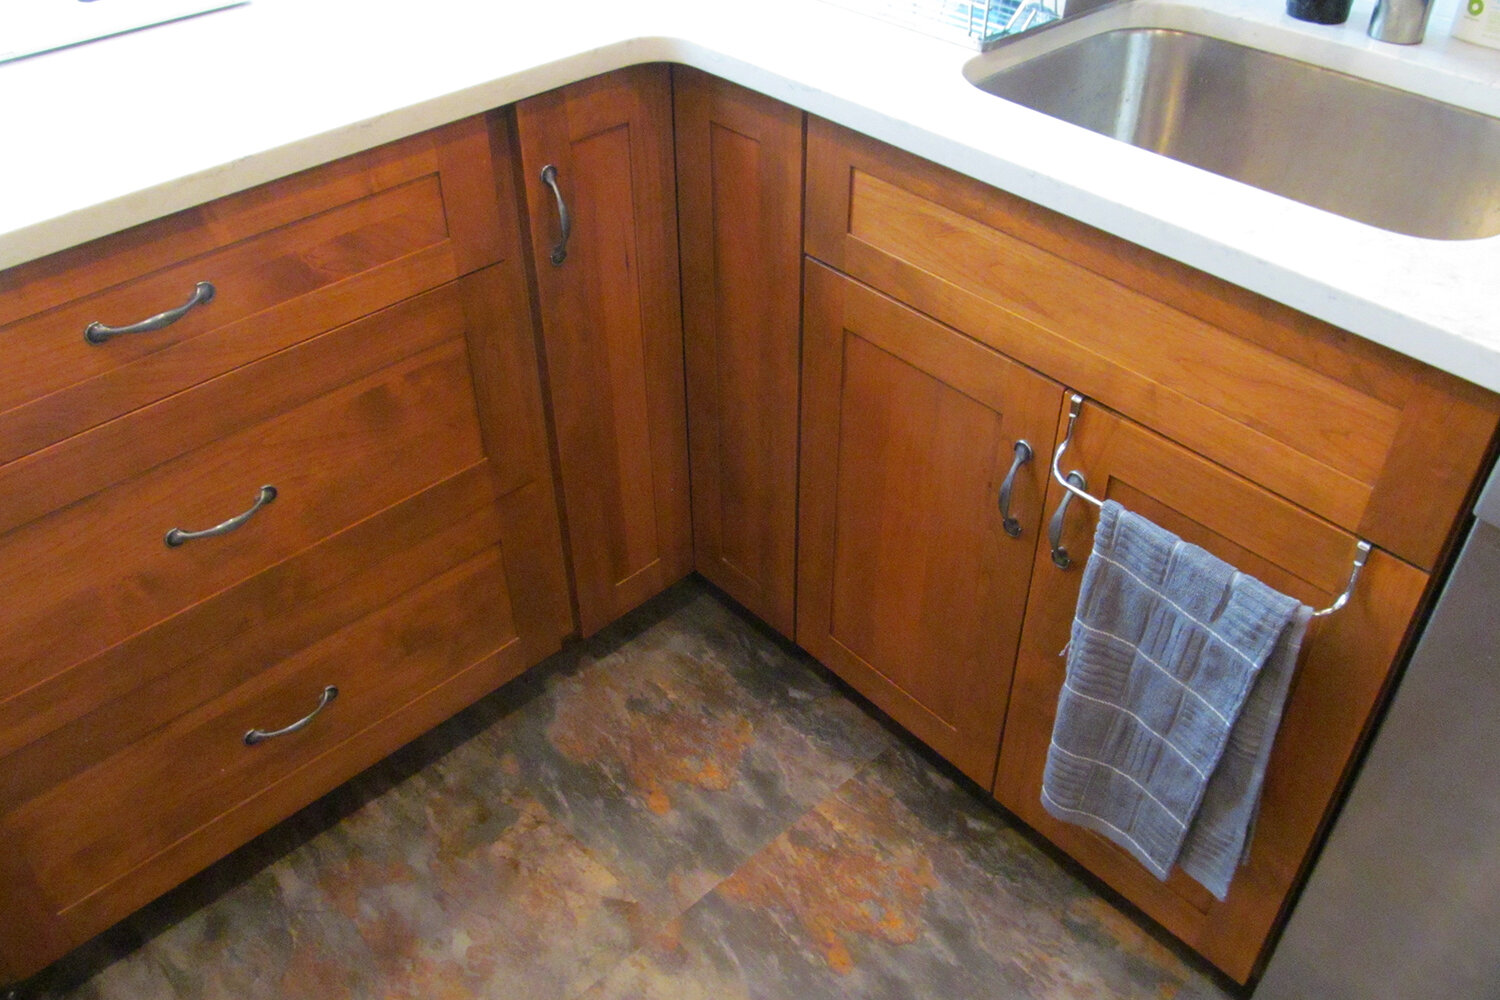 Frameless cabinets in alder are from Artizen. Lazy susan corner cabinets maximize storage space.